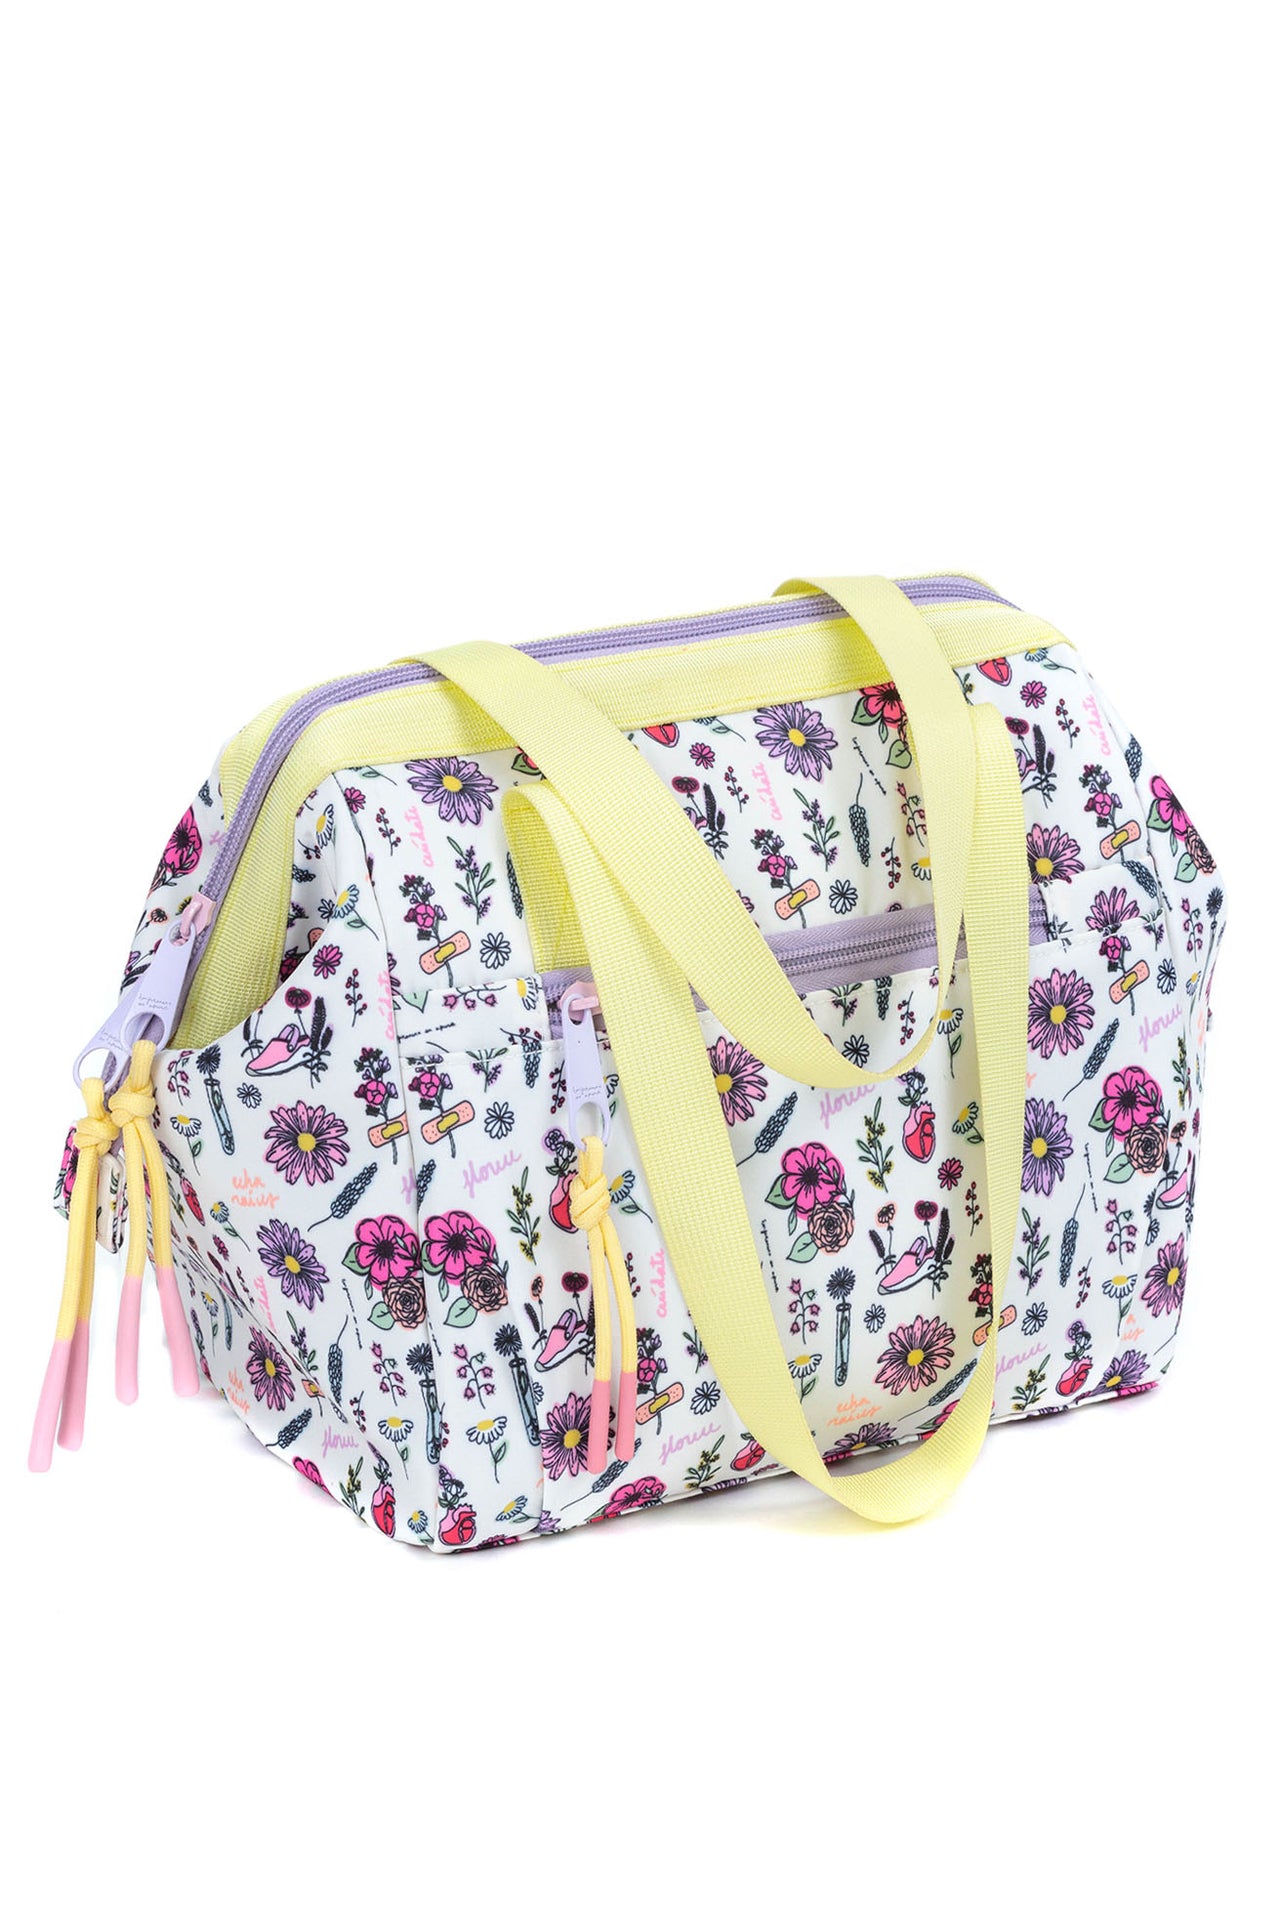 LUNCH BAG WITH HANDLES - BLOSSOM 🌸